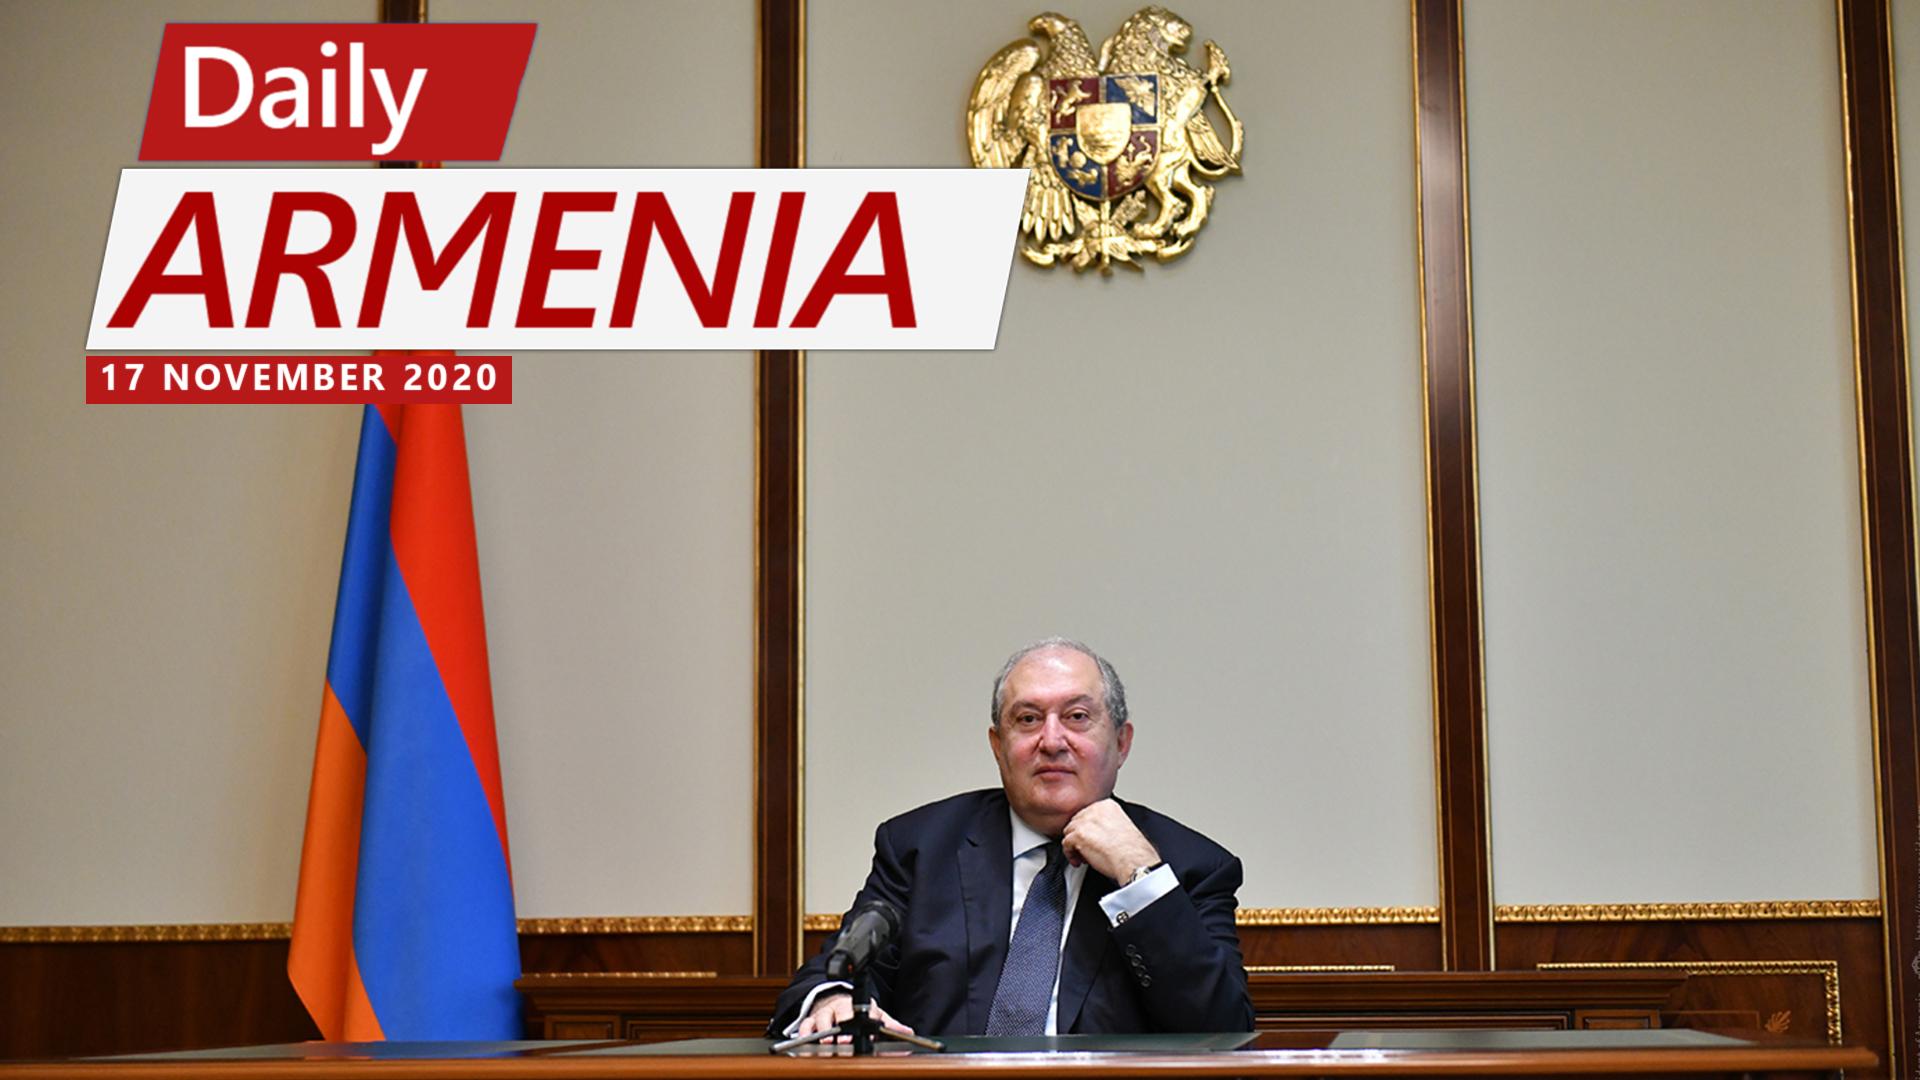 Armenian President Calls for Early Elections